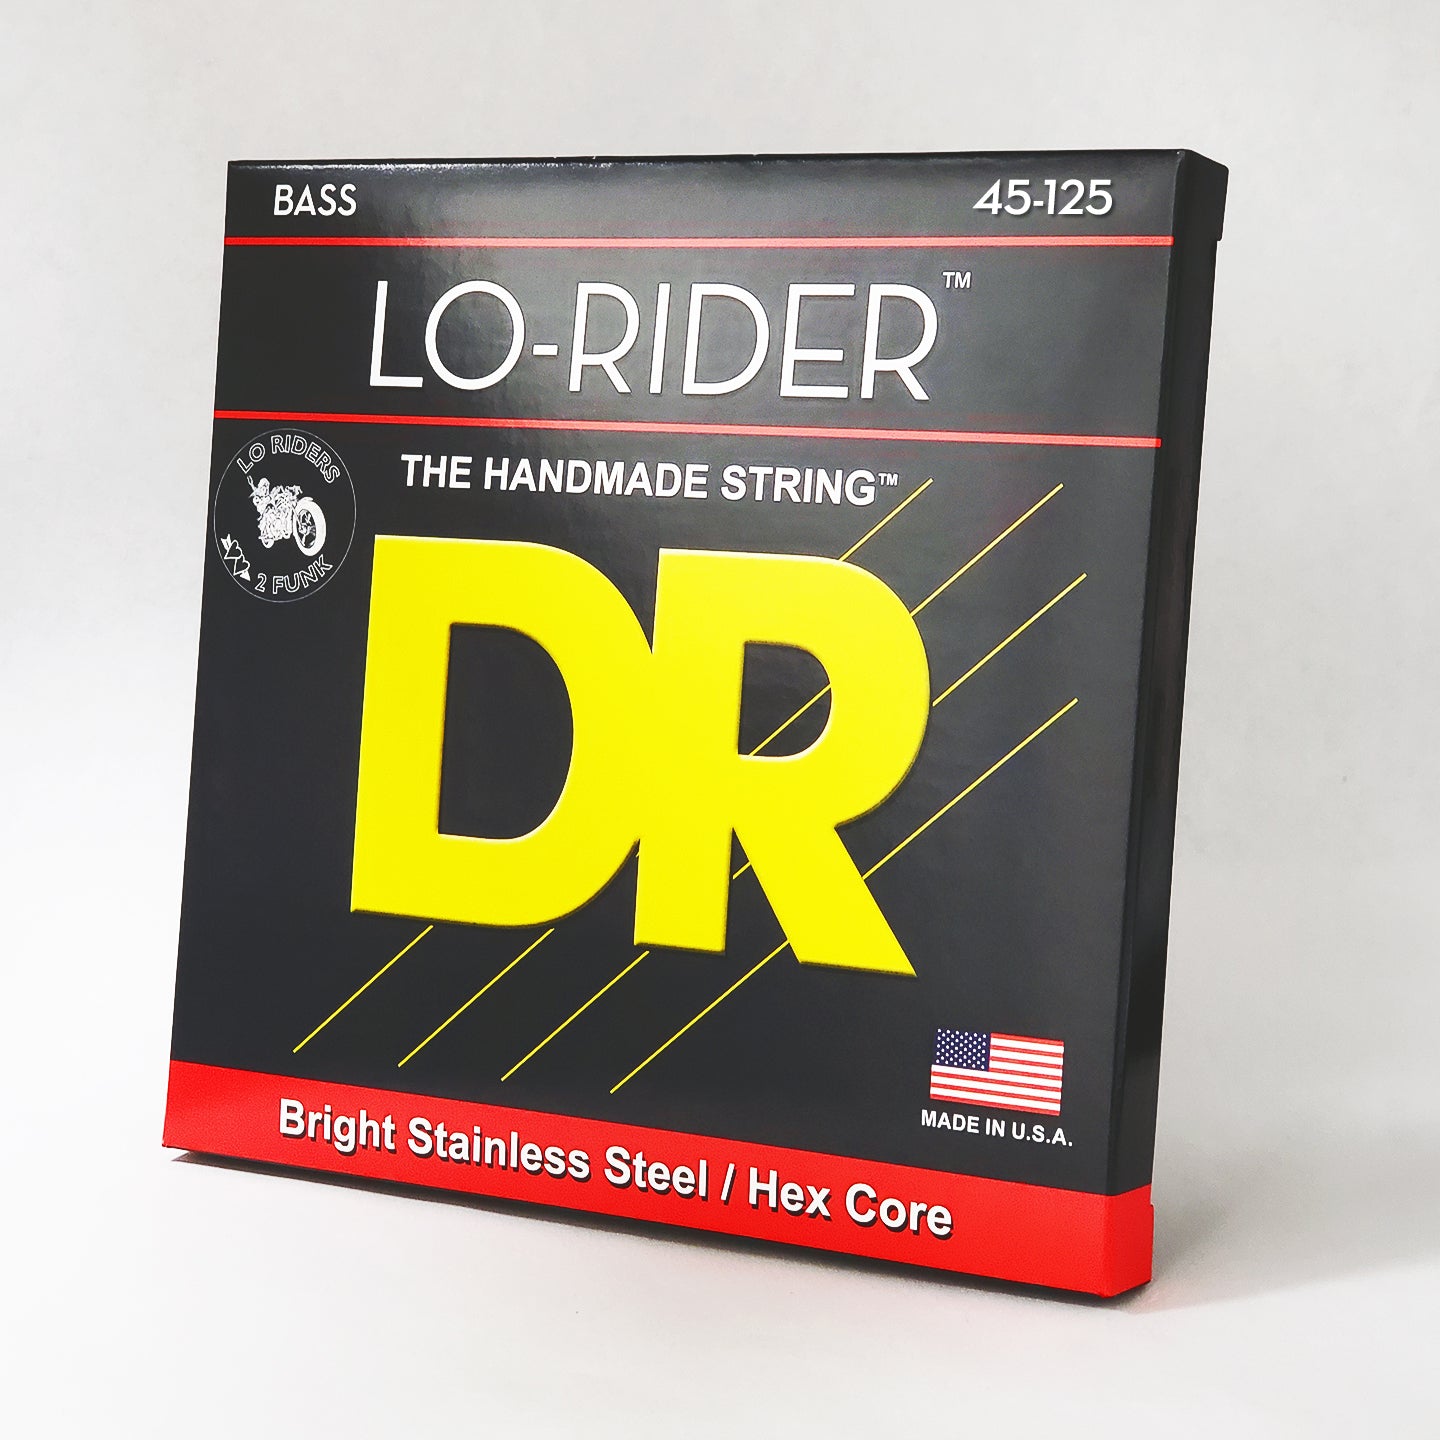 DR MH5-45 LO-RIDER Bass Strings. 5-String 45-125